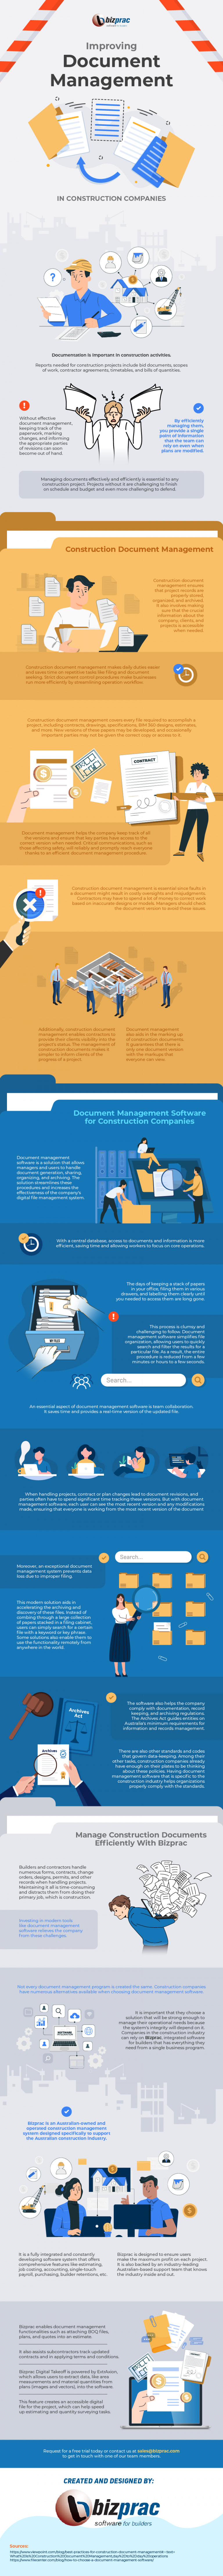 Improving-Document-Management-in -Construction-Companies-Infographic-Image-012